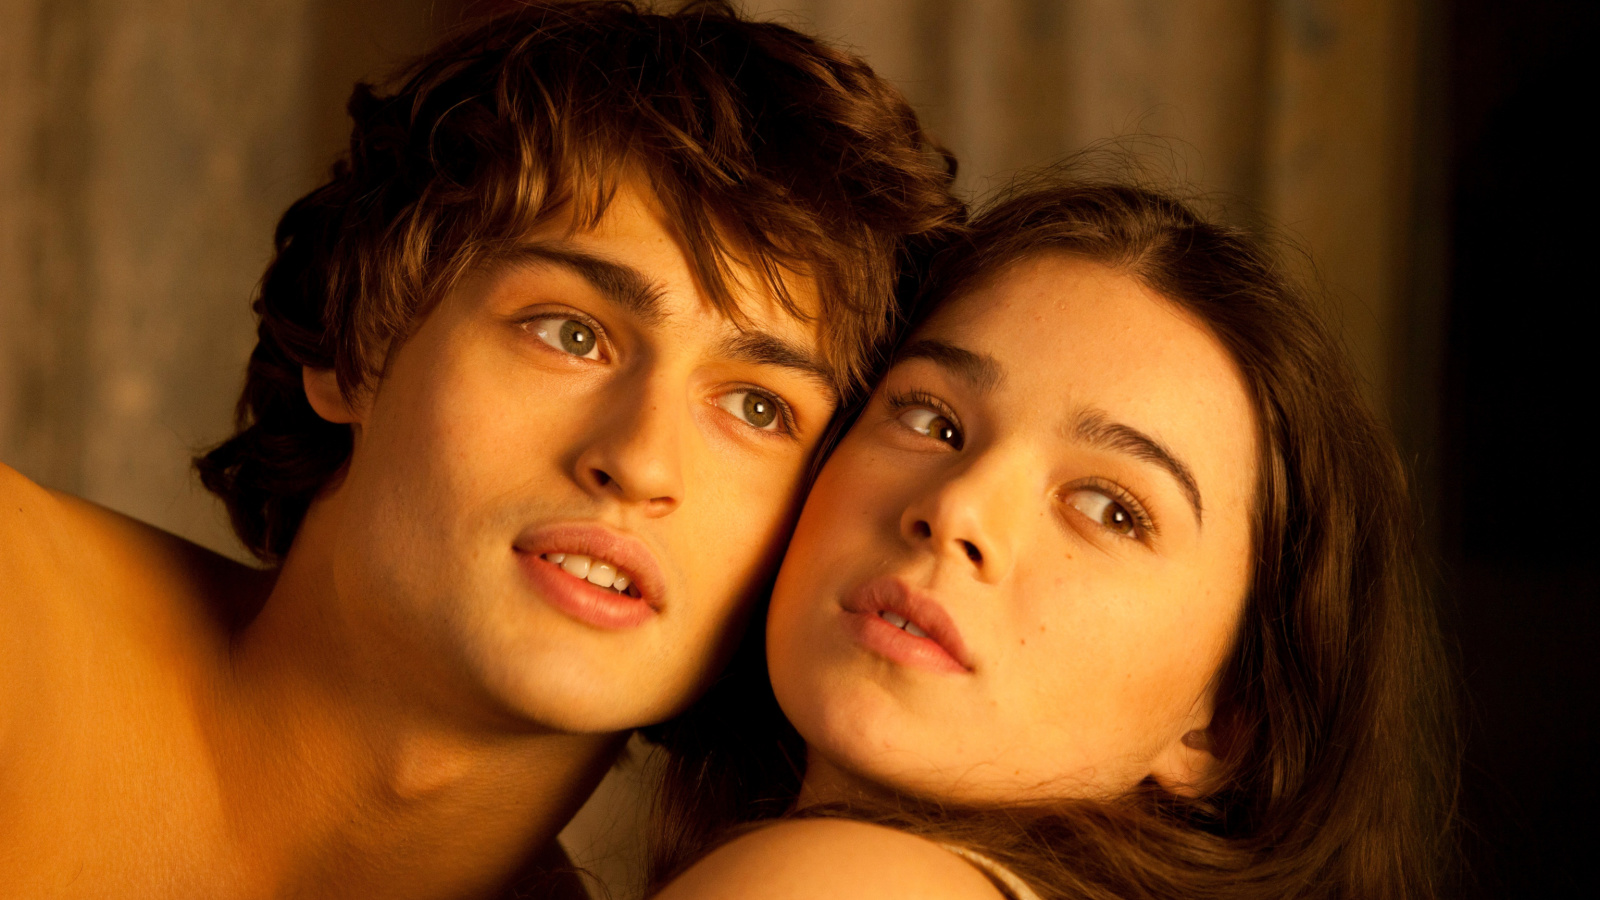 Romeo and Juliet with Hailee Steinfeld and Douglas Booth screenshot #1 1600x900